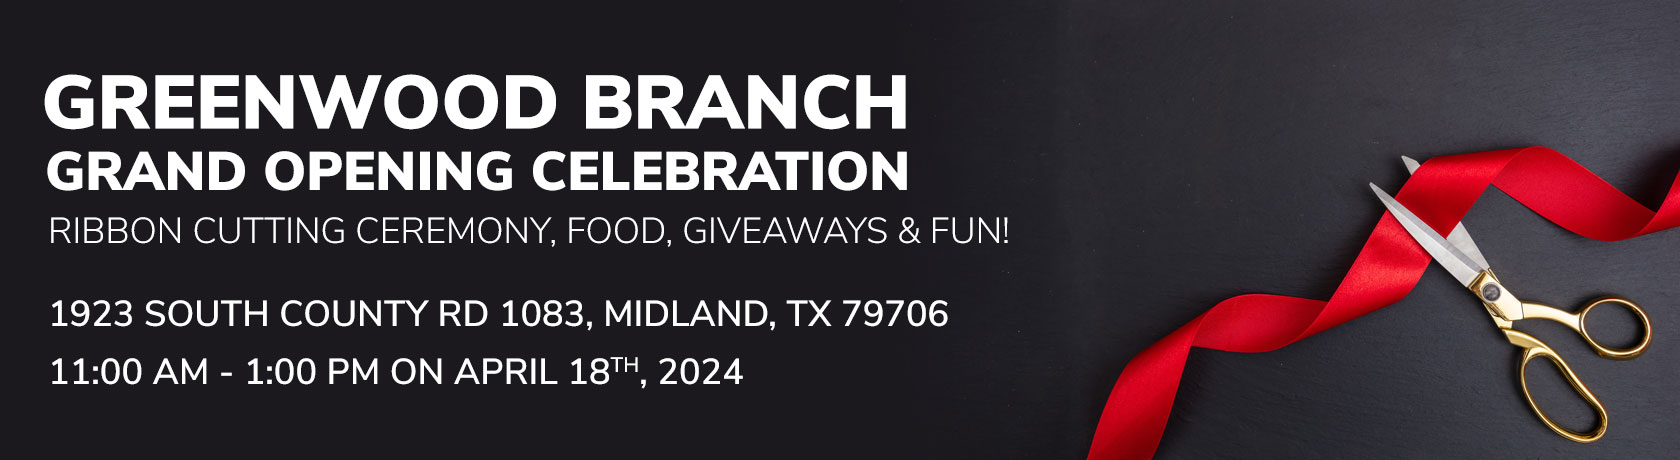 Greenwood Branch Grand Opening Celebration
Ribbon cutting ceremony, food, giveaways & fun!
1923 South County RD 1083, Midland, TX 79706
11:00 AM - 1:00 PM on April 18th, 2024